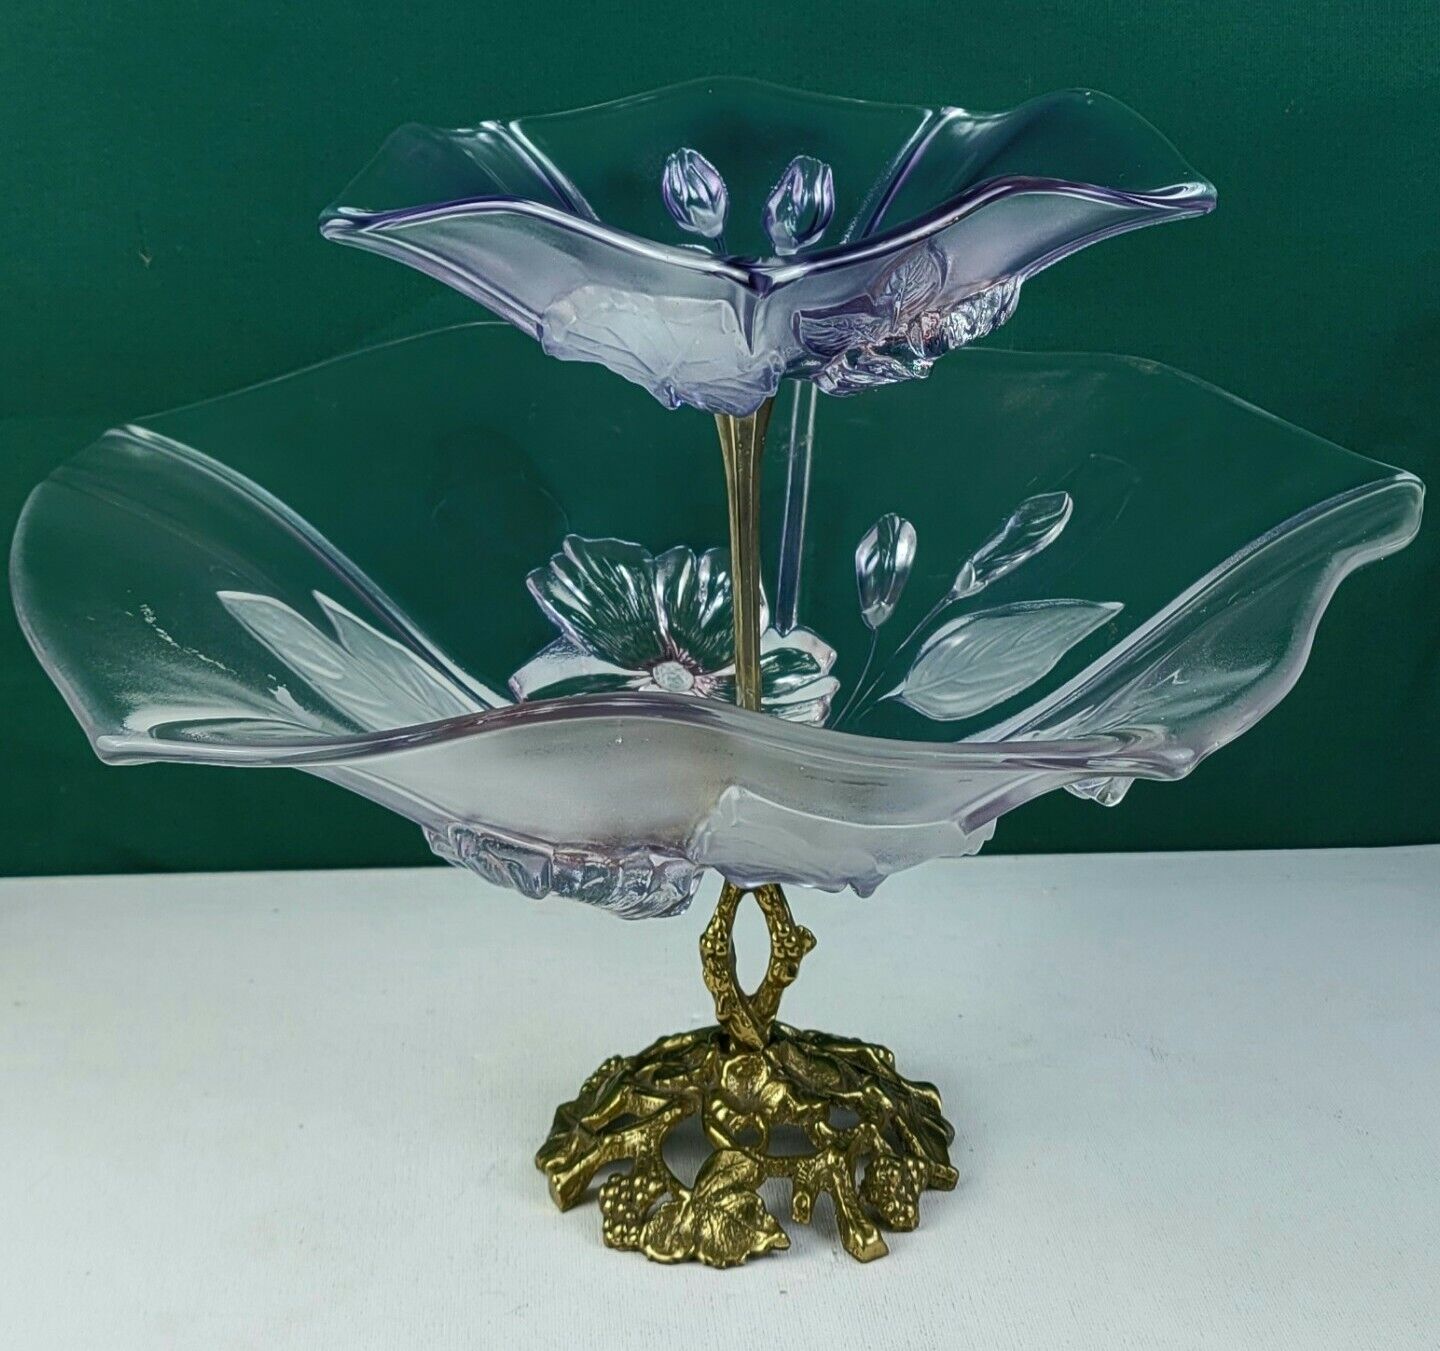 Calypso Mikasa Two Tier Serving Tray - Floral, Pastel, Gold Toned Metalwork